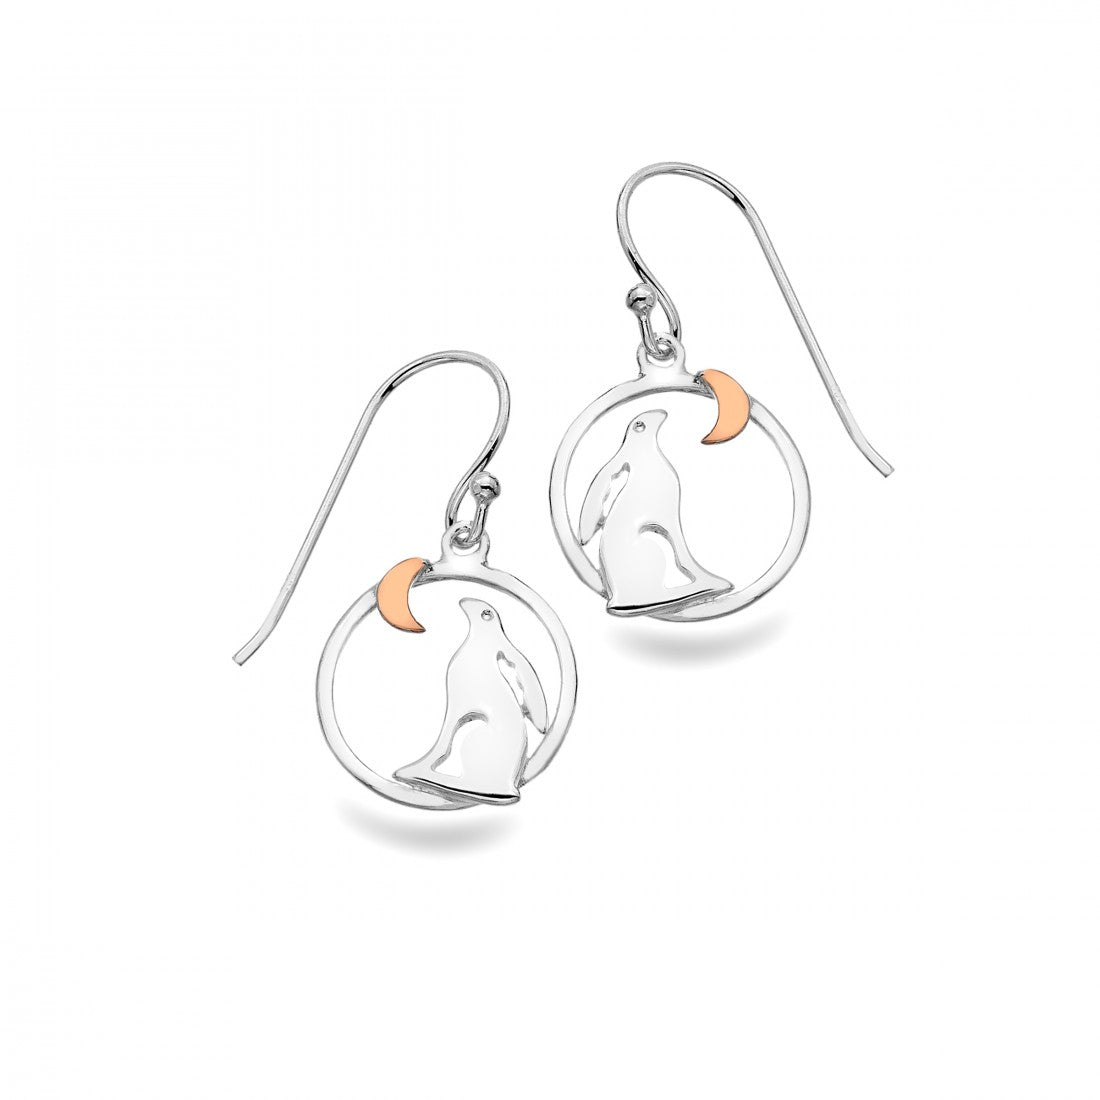 Hare And Moon Earrings - The Nancy Smillie Shop - Art, Jewellery & Designer Gifts Glasgow